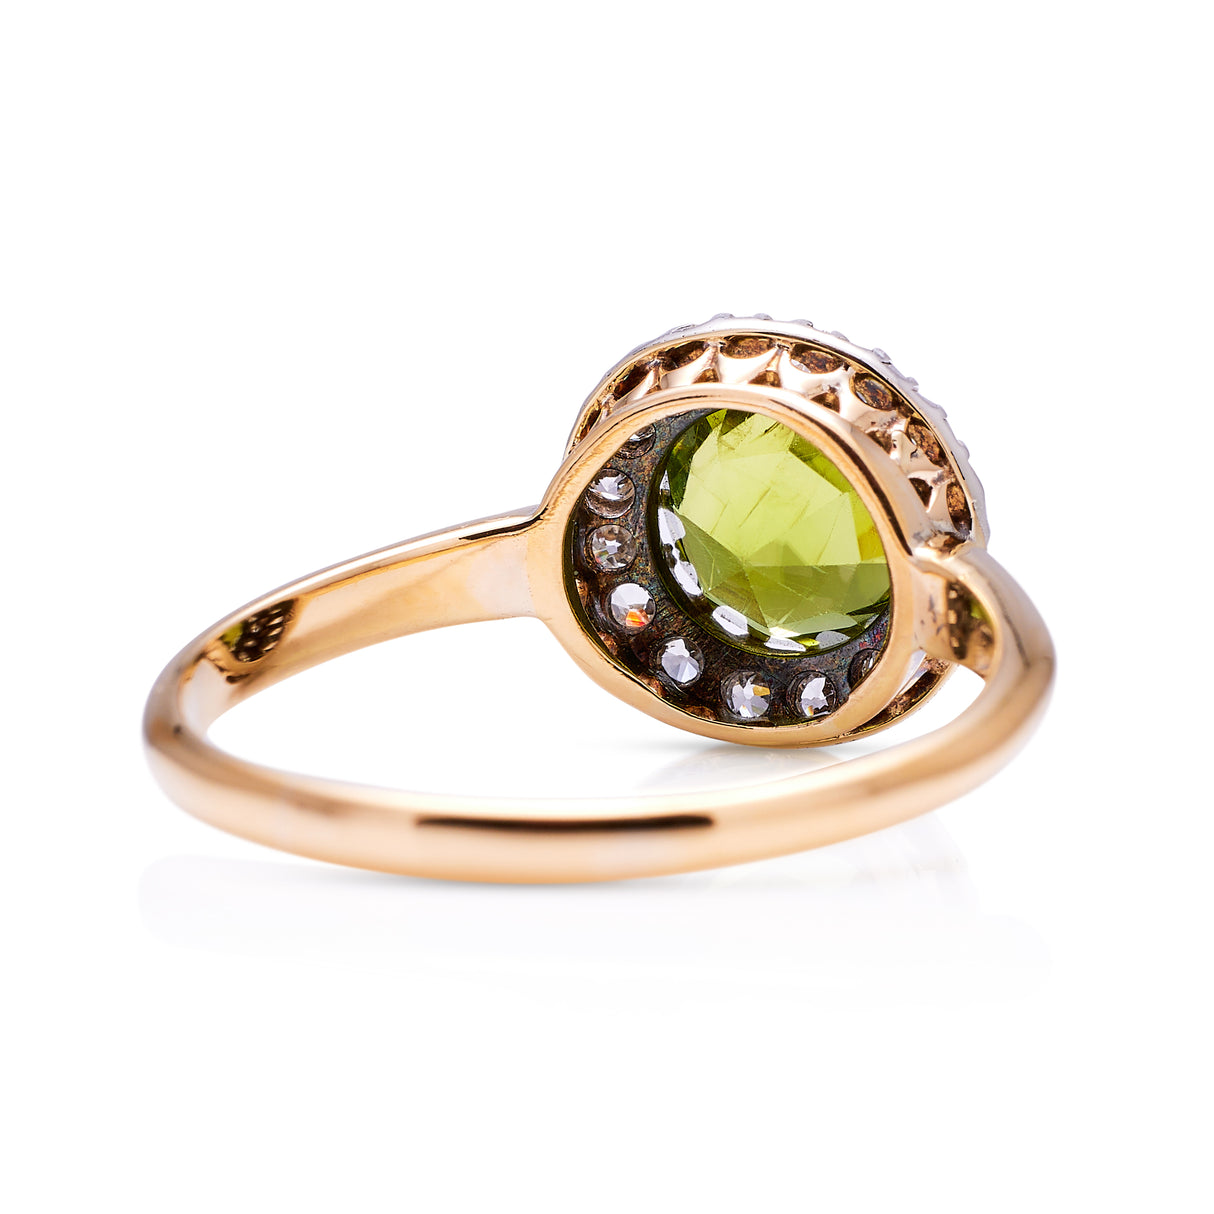 Edwardian peridot and diamond cluster ring, rear view.  